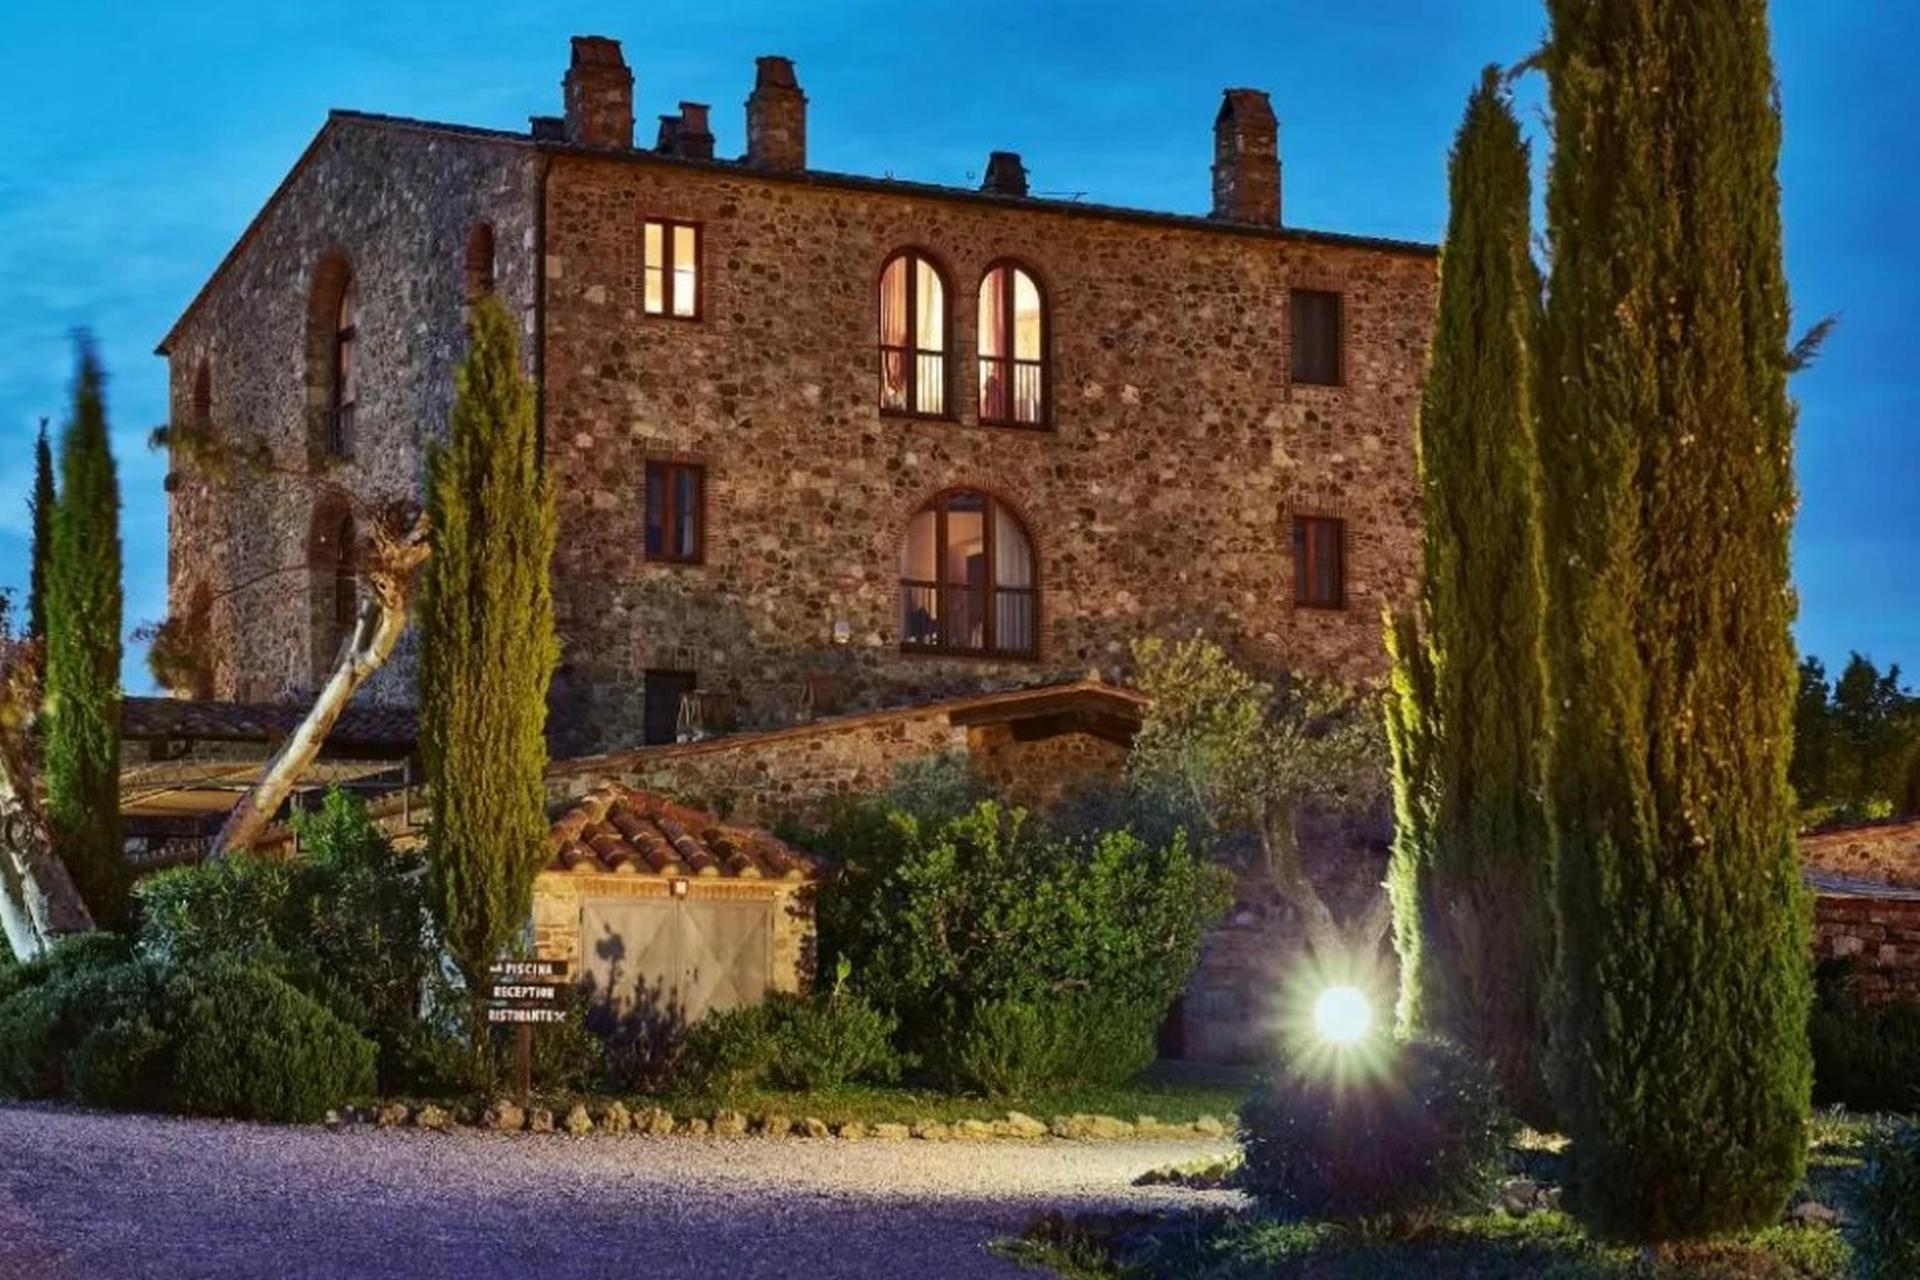 Agriturismo Toscane Agriturismo in voormalig klooster in zuid-Toscane | myitaly.nl